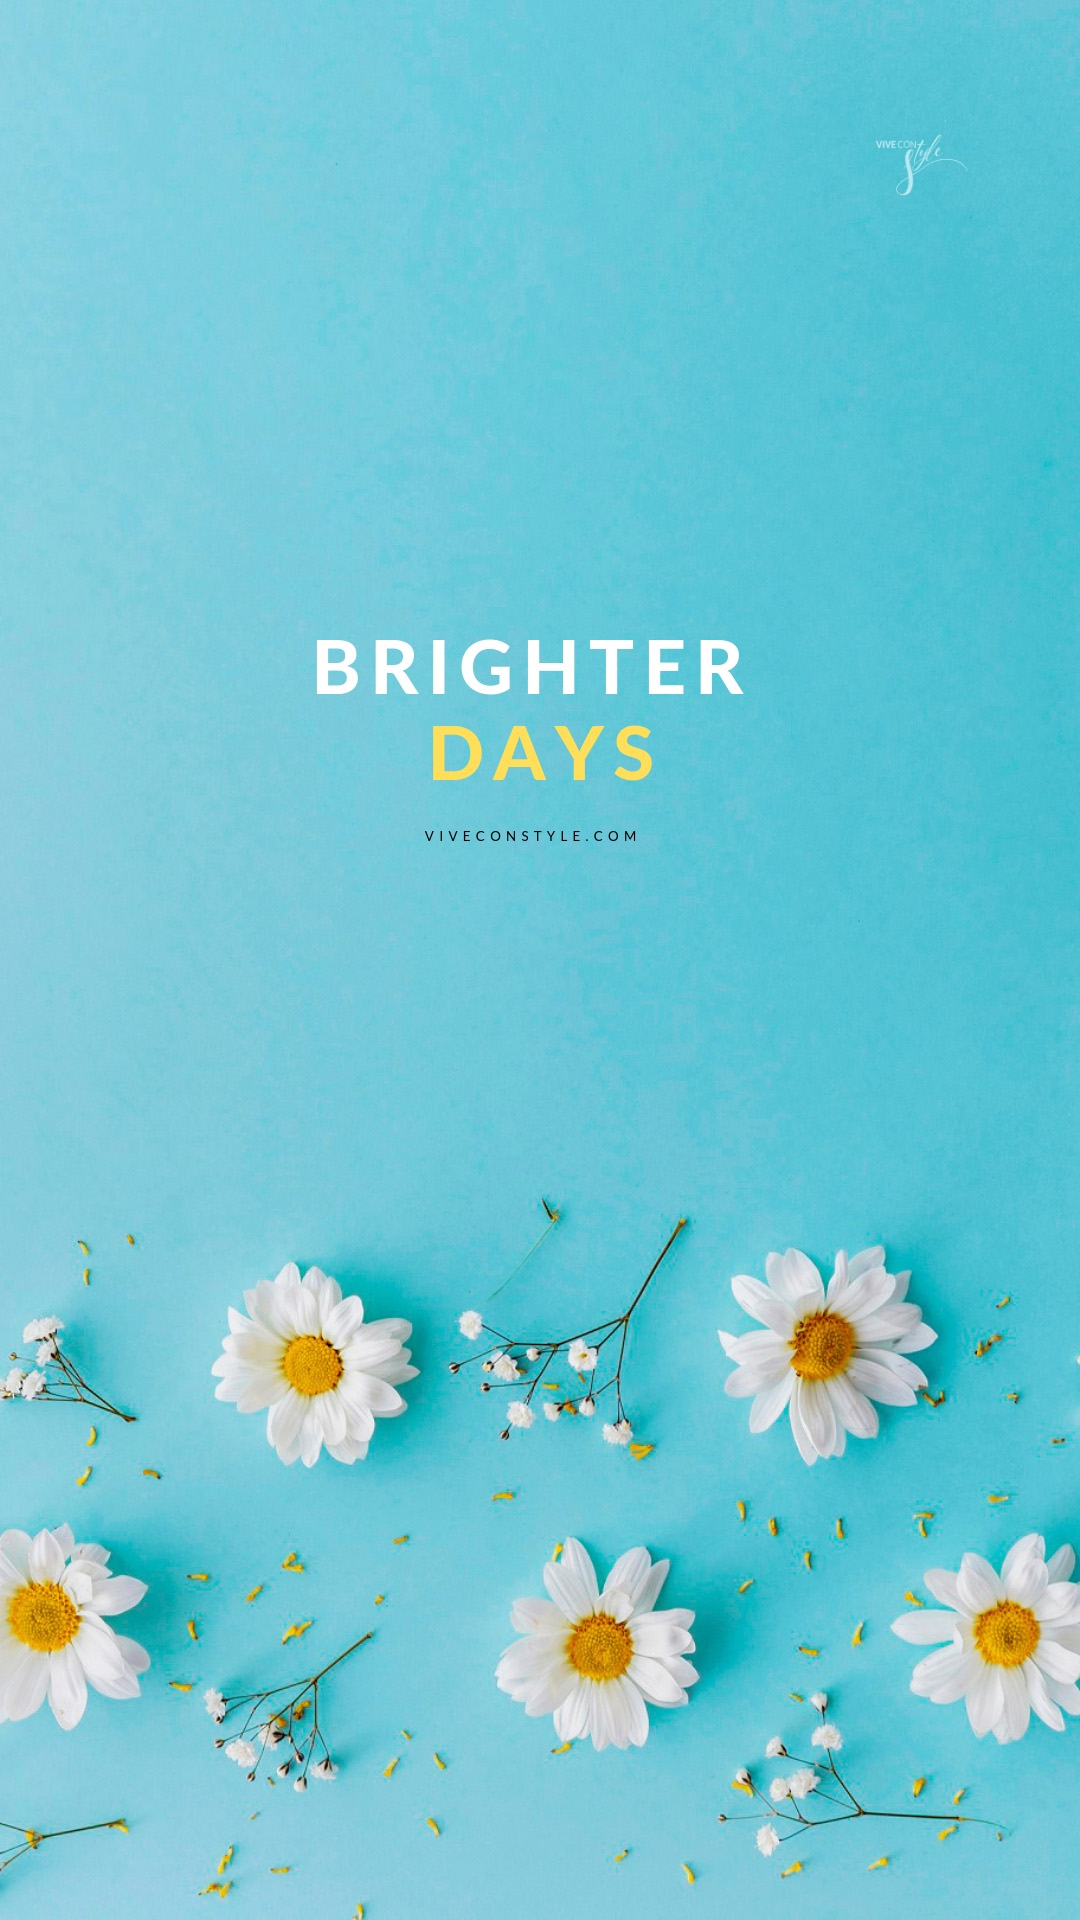 Brighter Days Spring Mobile Wallpaper Vive Con Style